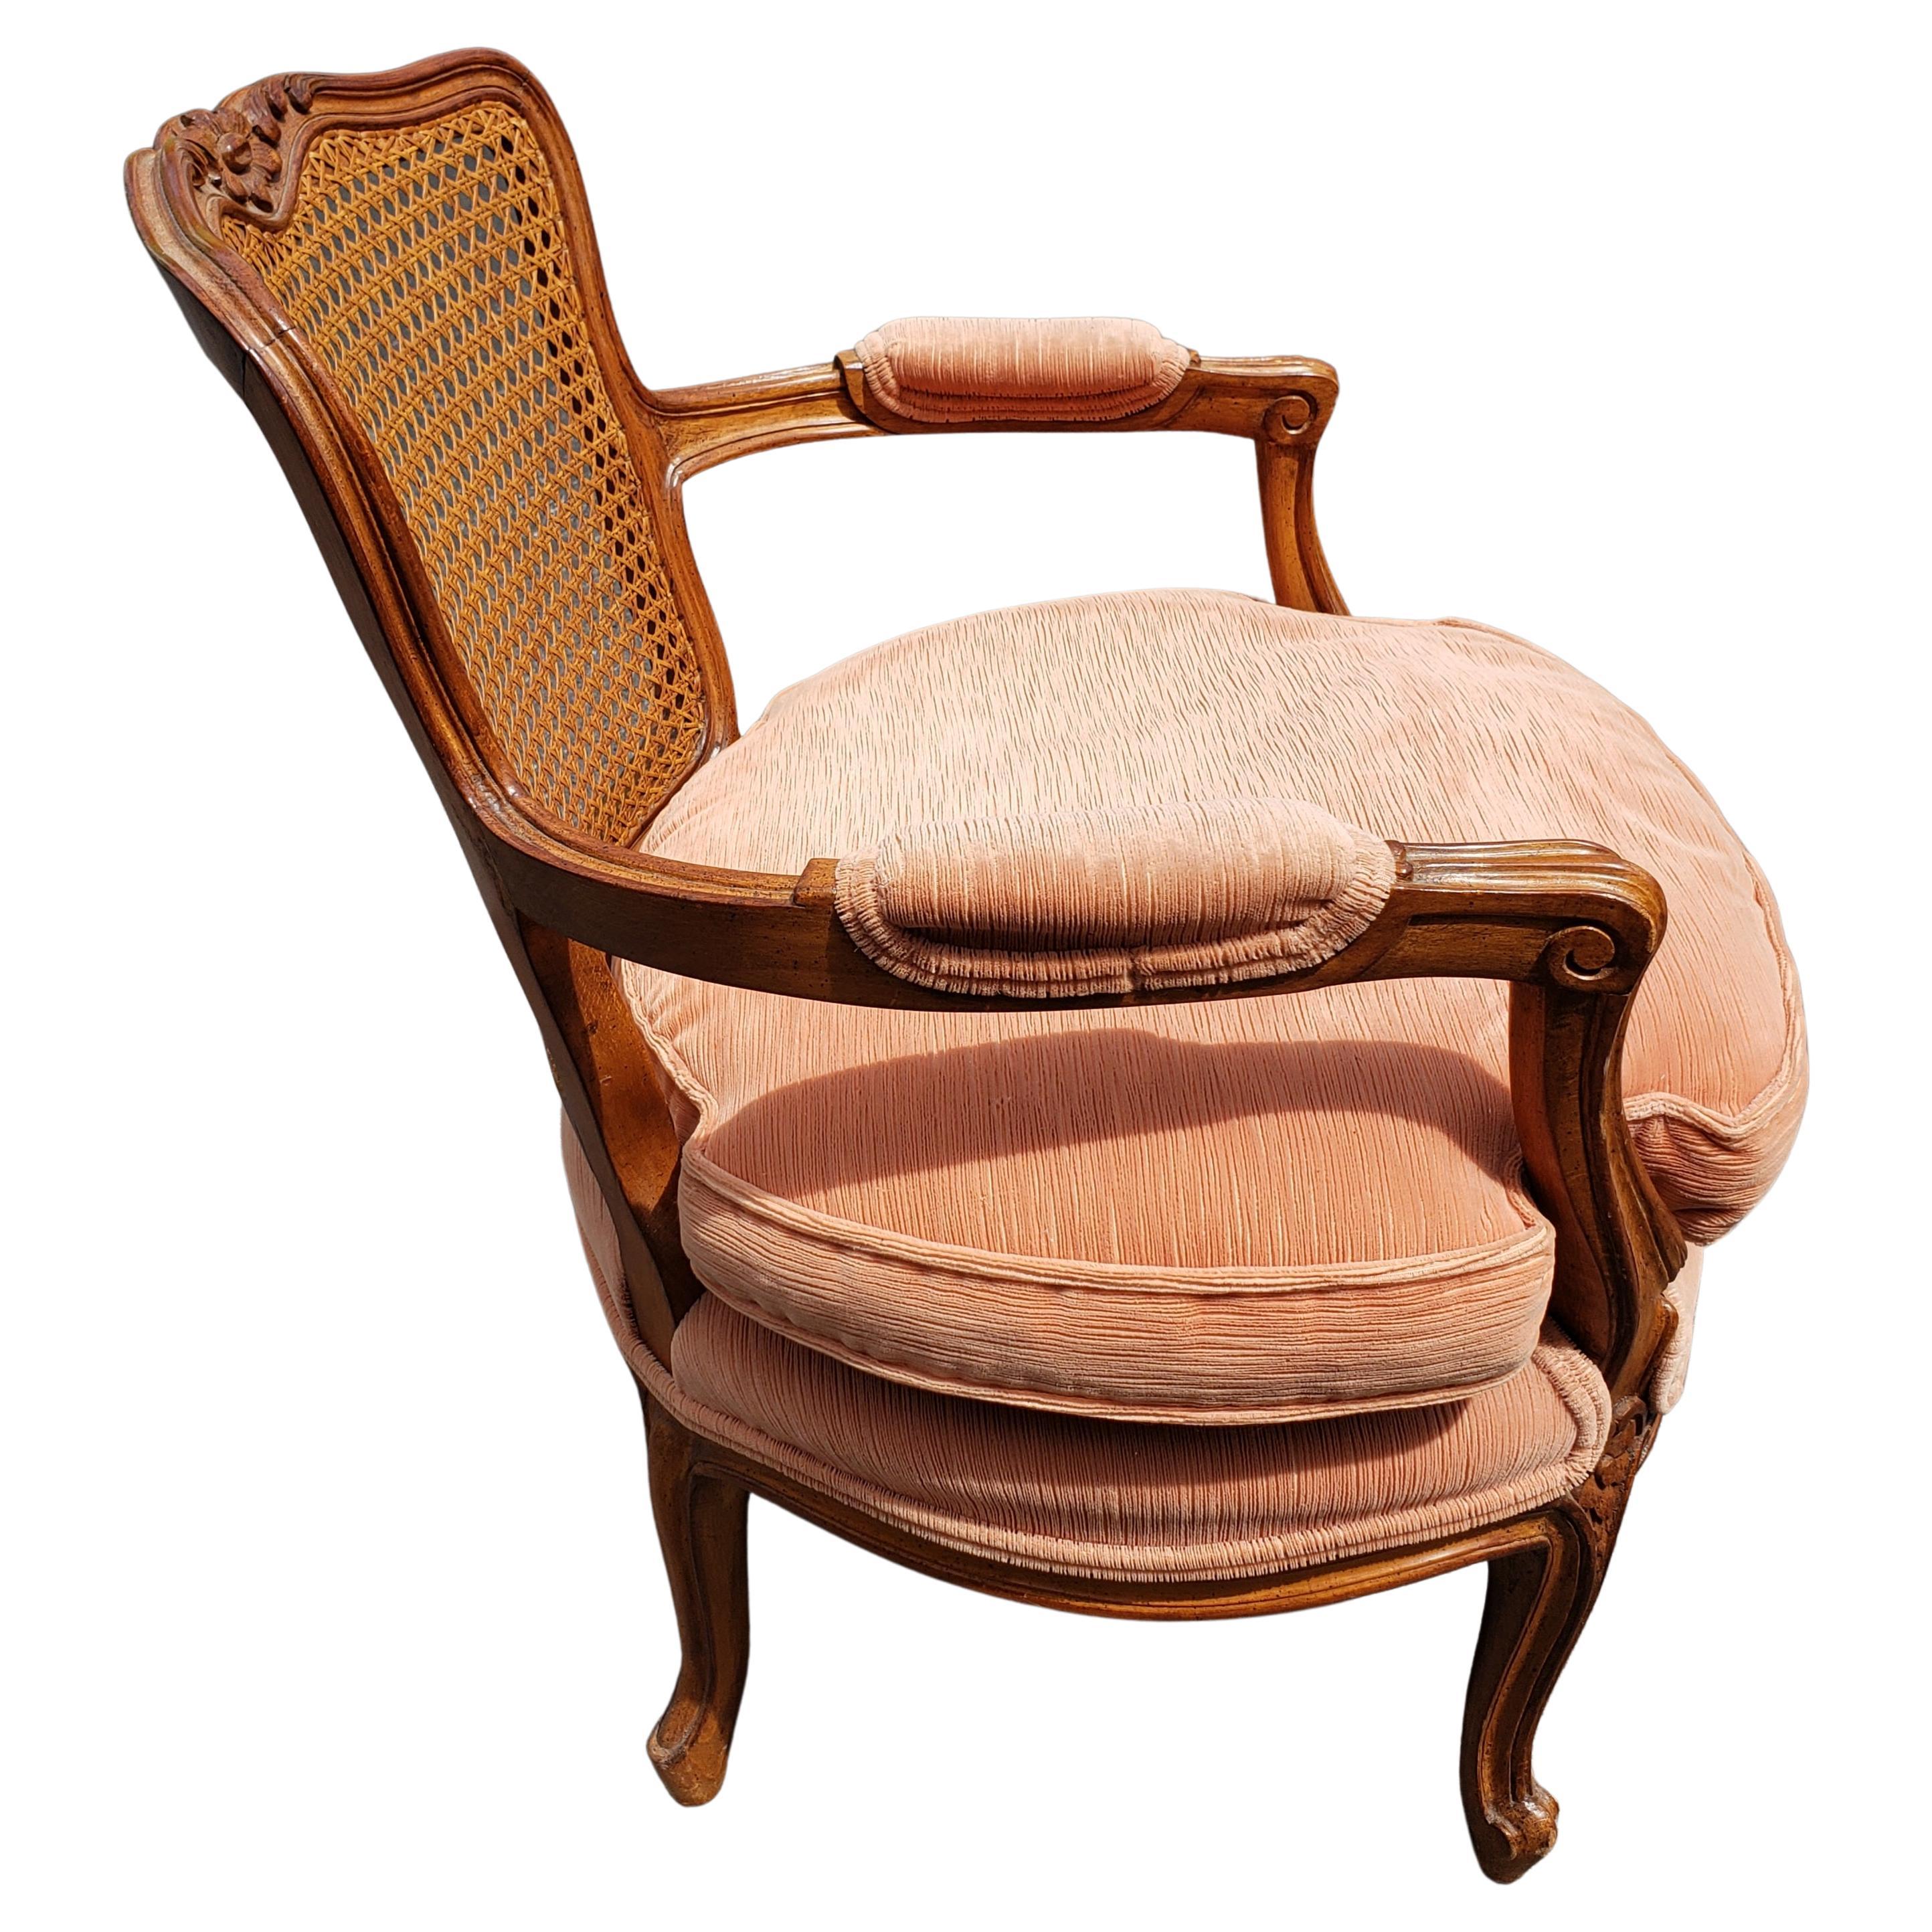 American Danby Furniture French Louis XV Bergère Chair with Cane Back, Circa 1970s